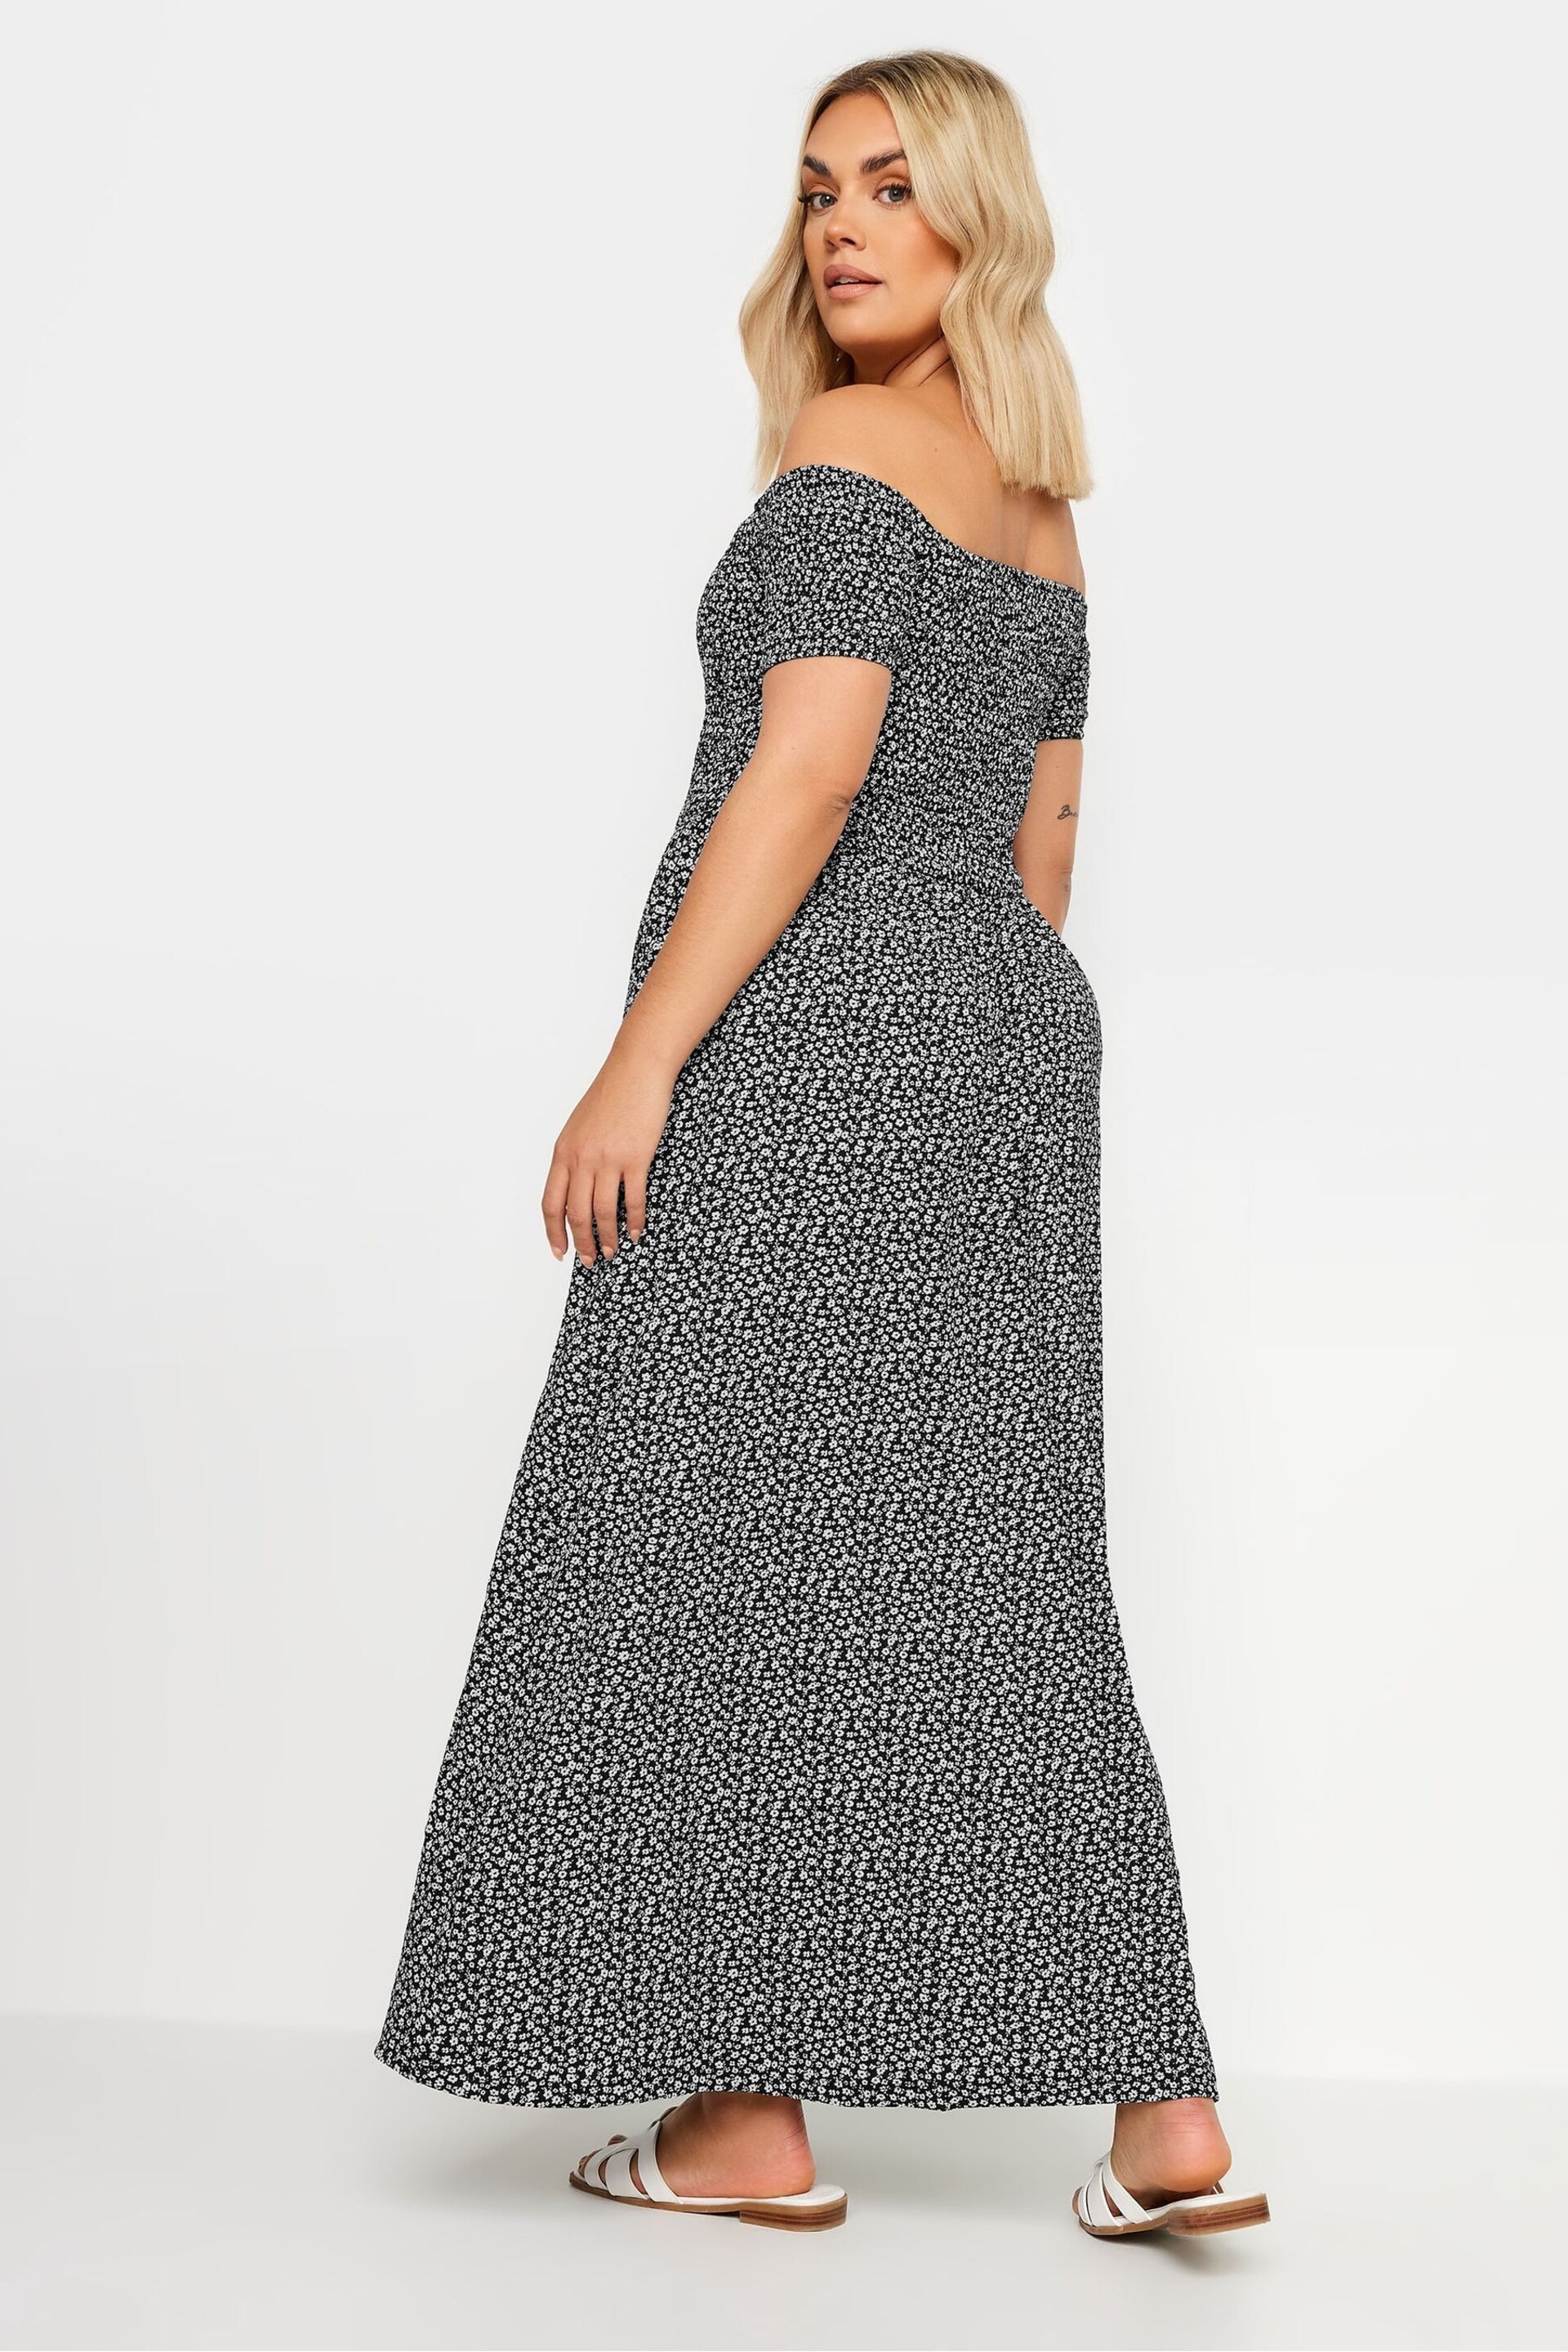 Yours Curve Black Denim Ditsy Shirred Midaxi Dress - Image 4 of 6